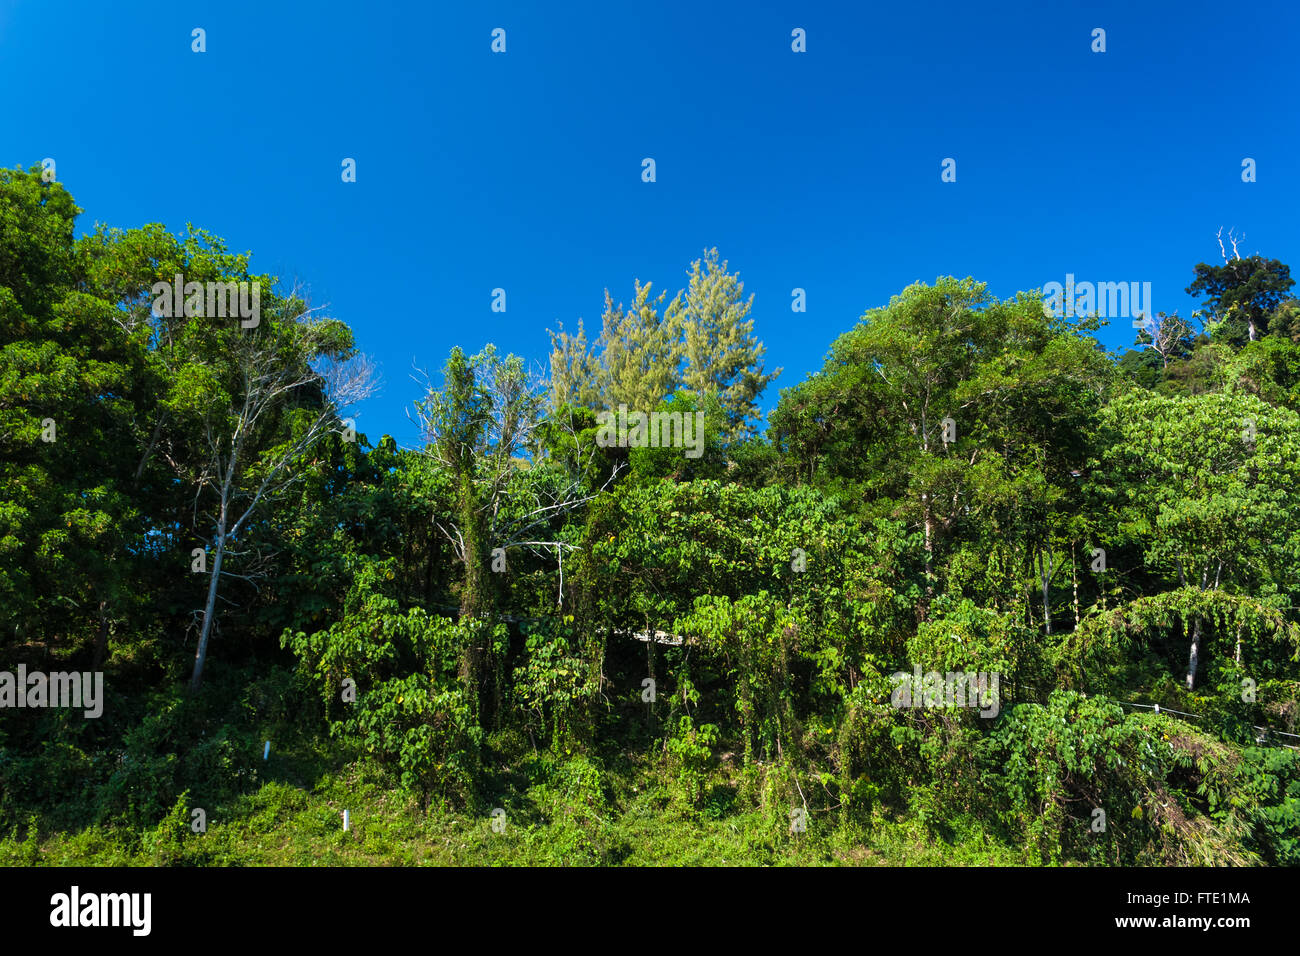 Very High Definition Treeline with a Colorful Blue Sky Stock Photo - Image  of countryside, nature: 119614296